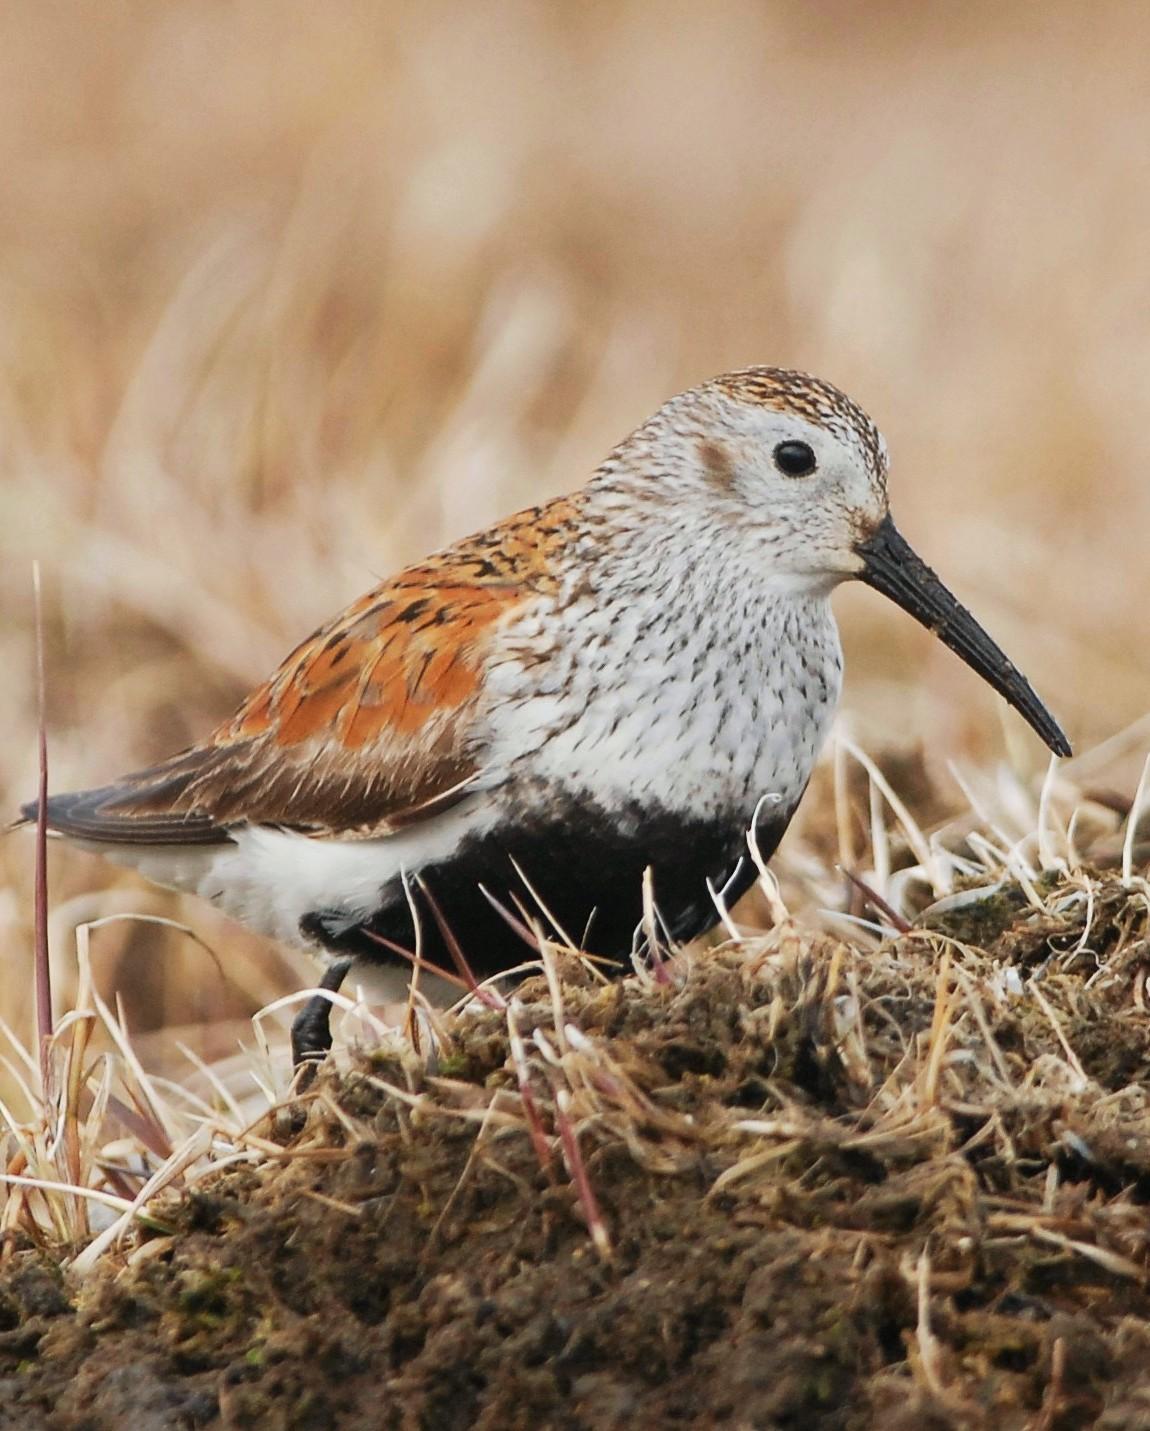 Dunlin Photo by David Hollie